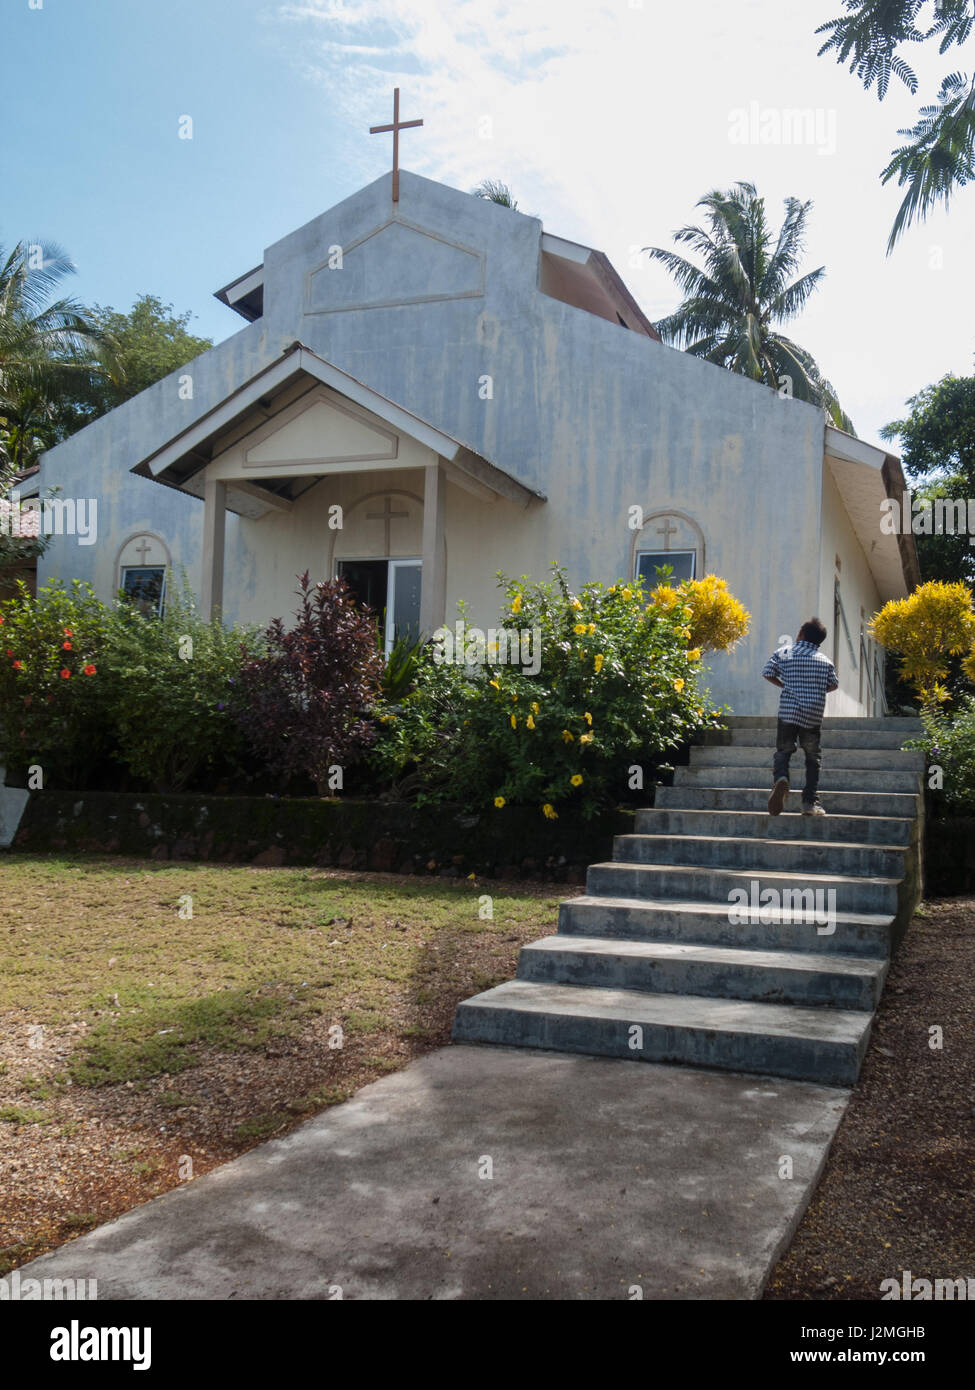 TODAK ISLAND, BATAM, INDONESIA. A boy steps up the stairs in front of a white wall church. Stock Photo